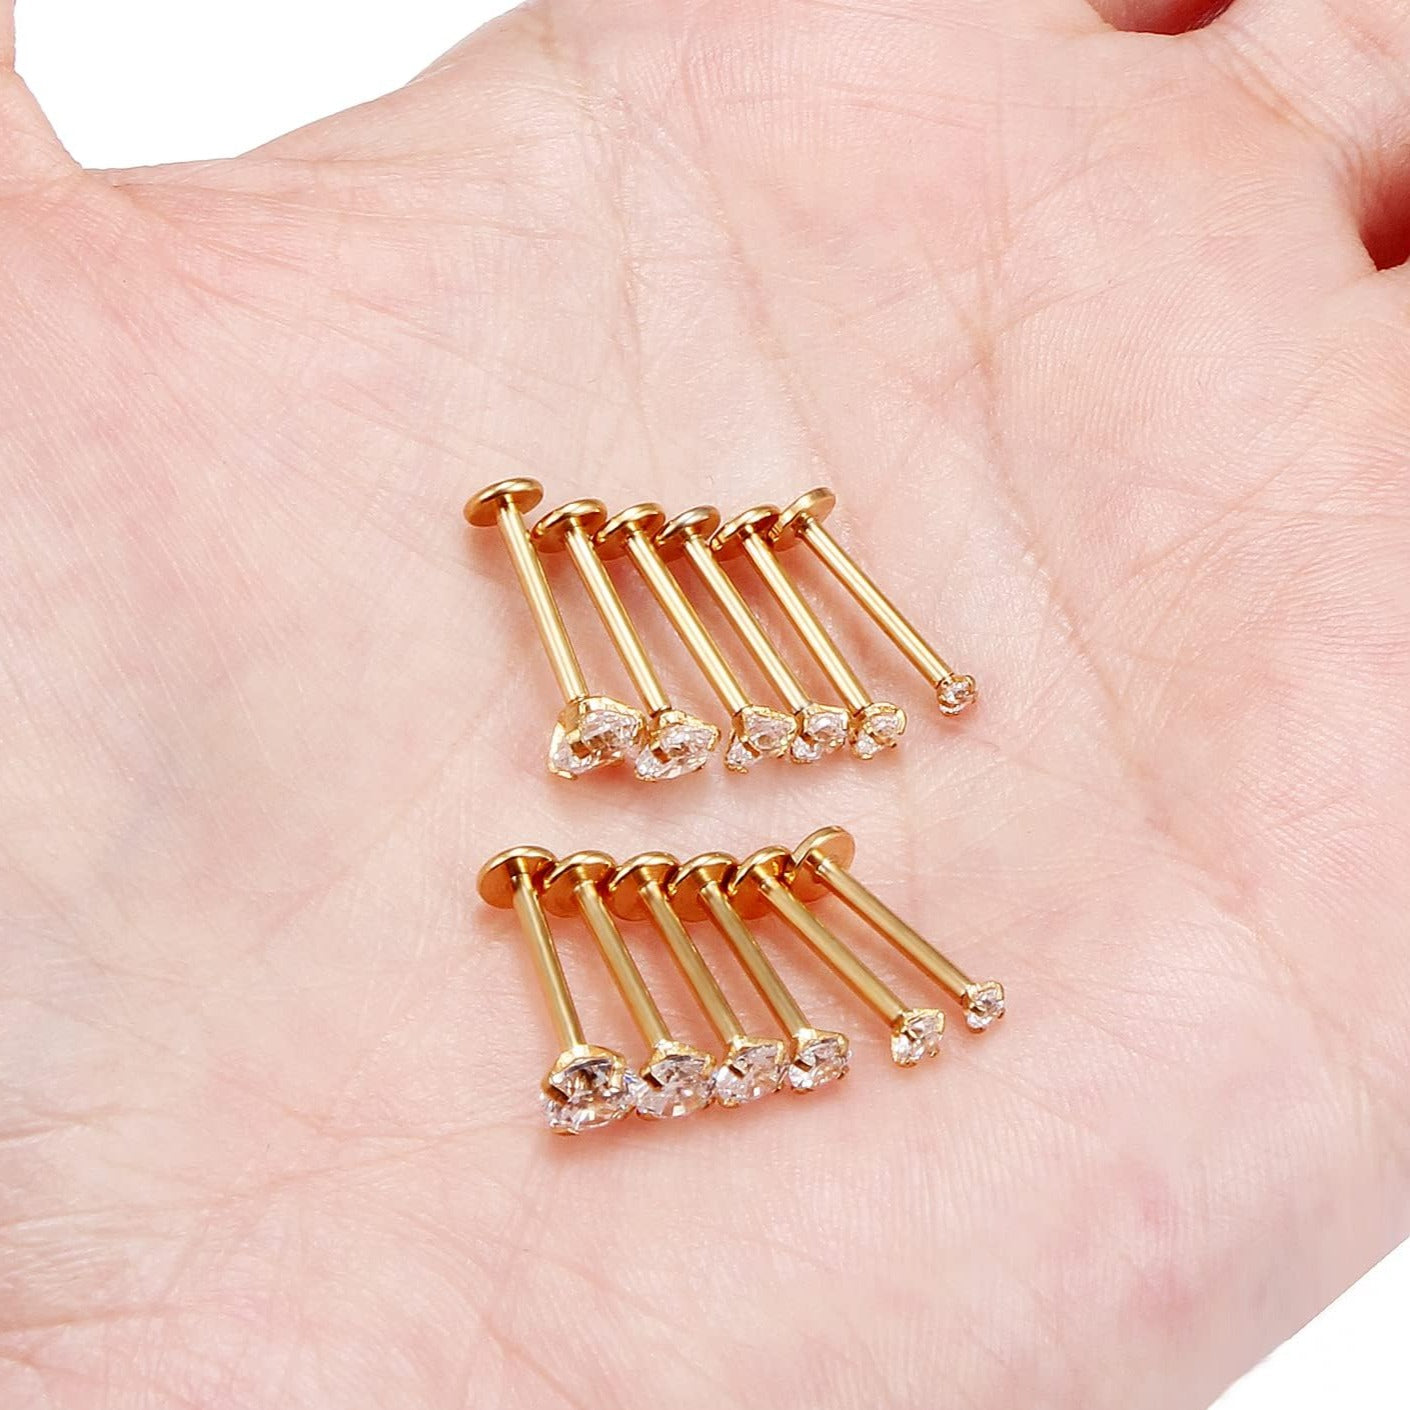 20G Gold Steel Threadless Push In CZ Prong Set Ion Plated Tragus Labret